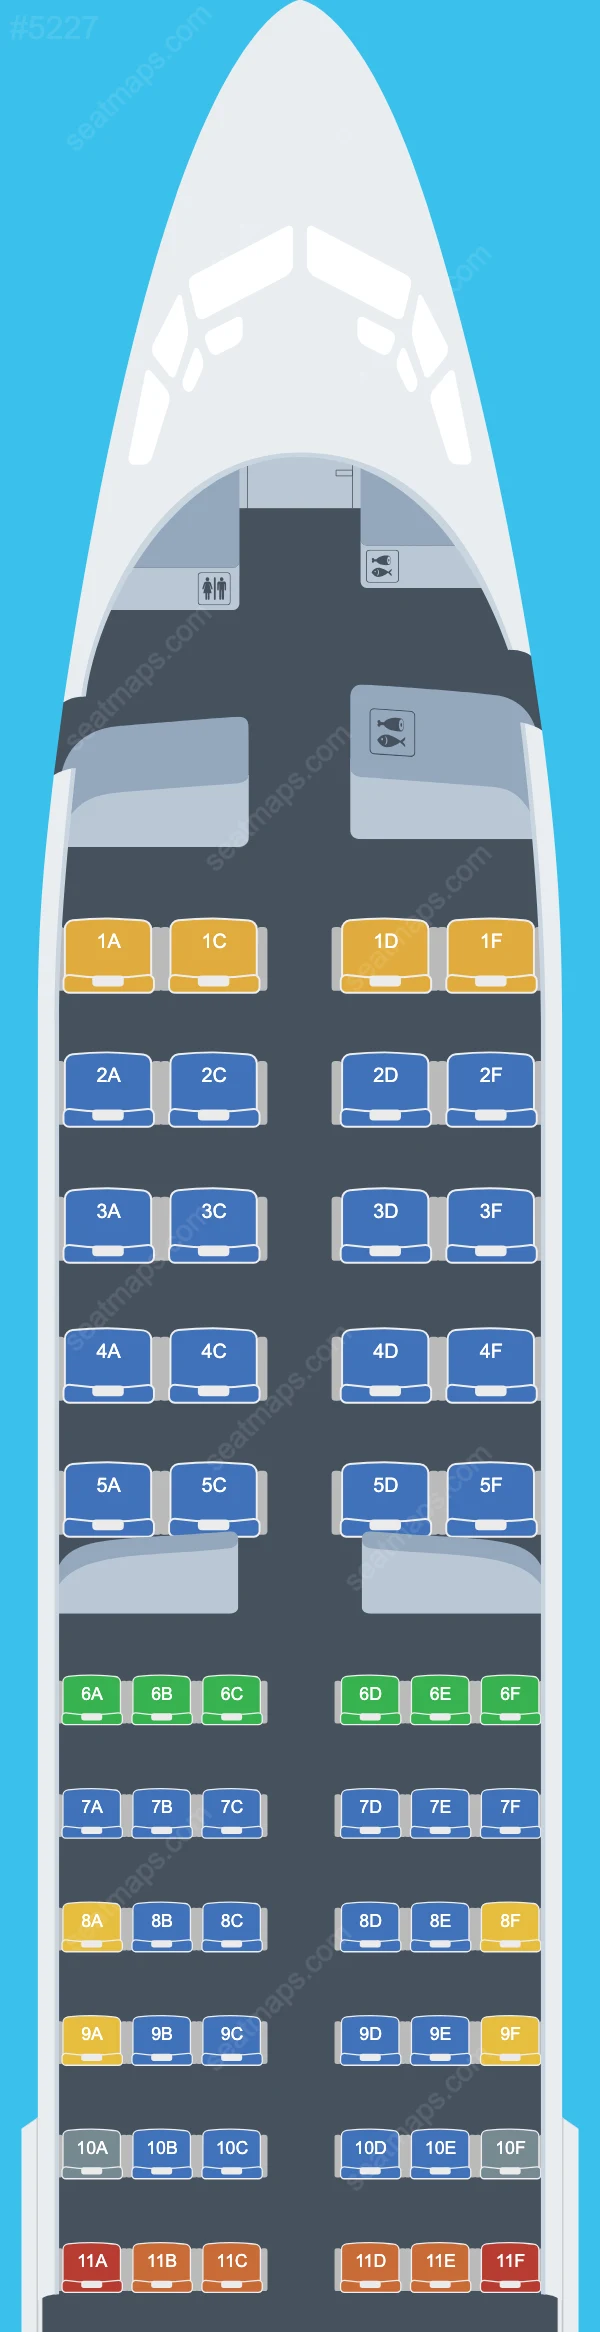 Tassili Airlines Boeing 737-800 seatmap mobile preview